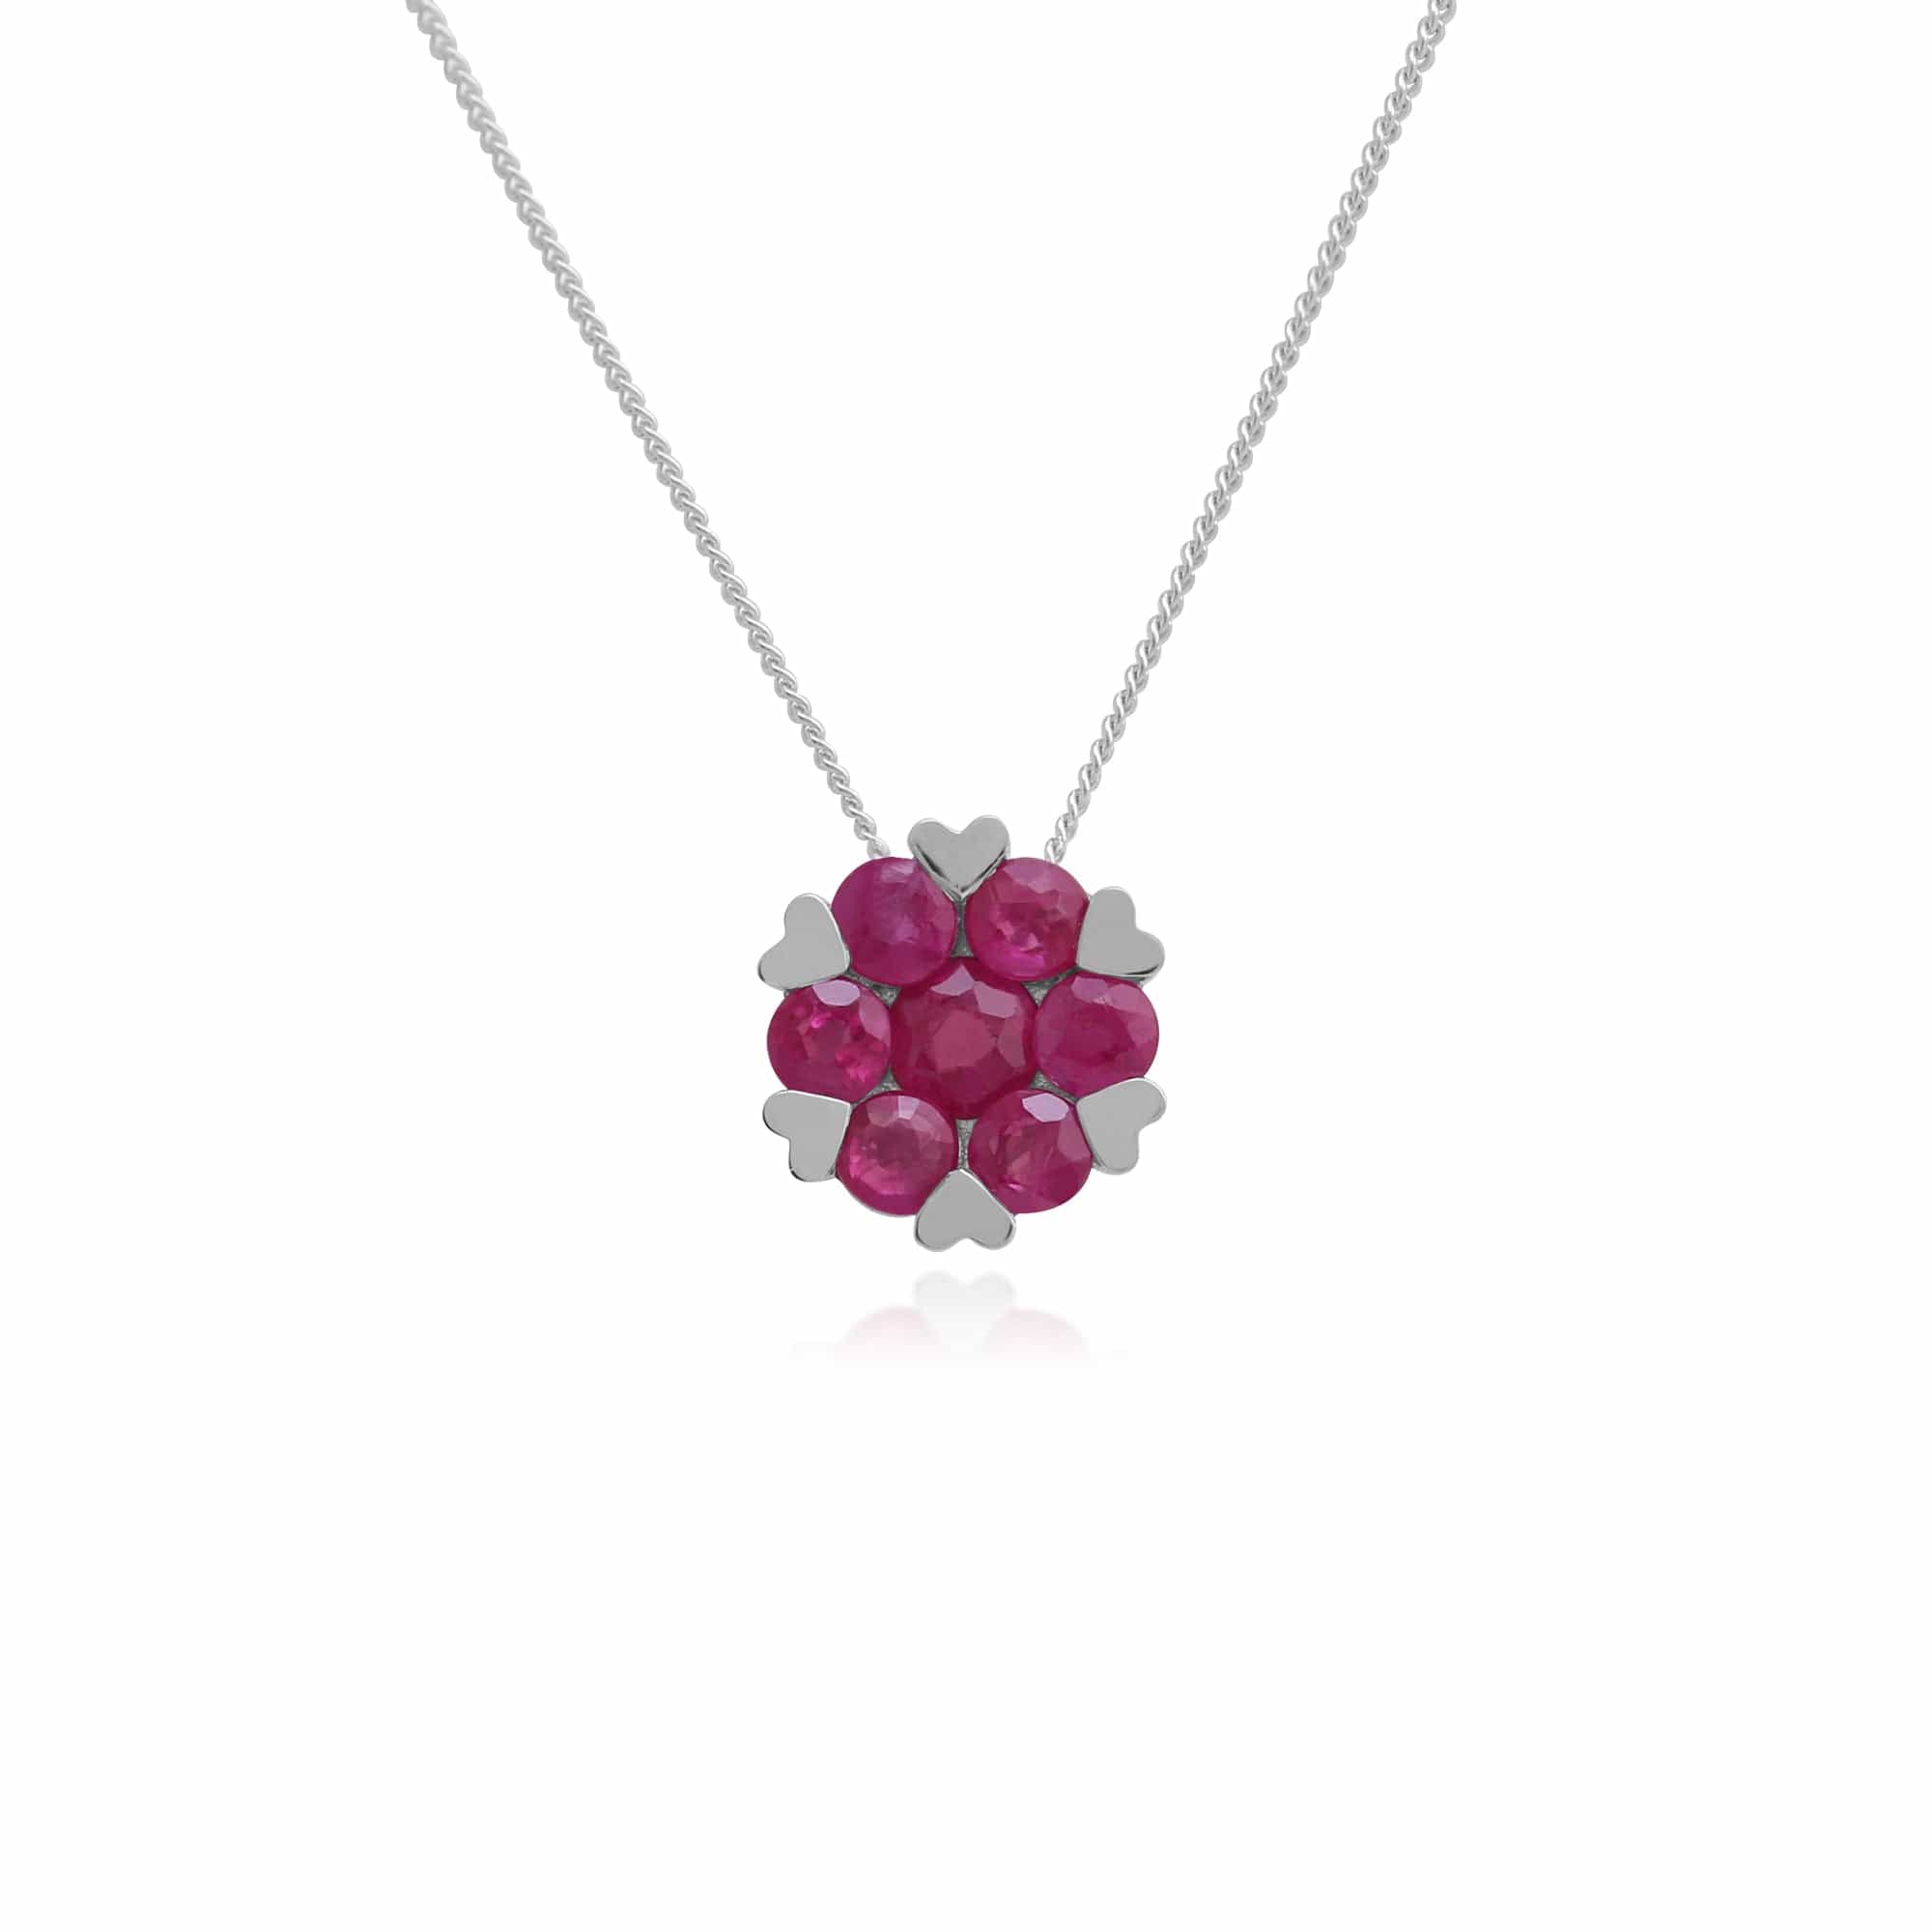 Gemondo 9ct White Gold 0.50ct Ruby Floral Cluster Pendant on 45cm Chain Image